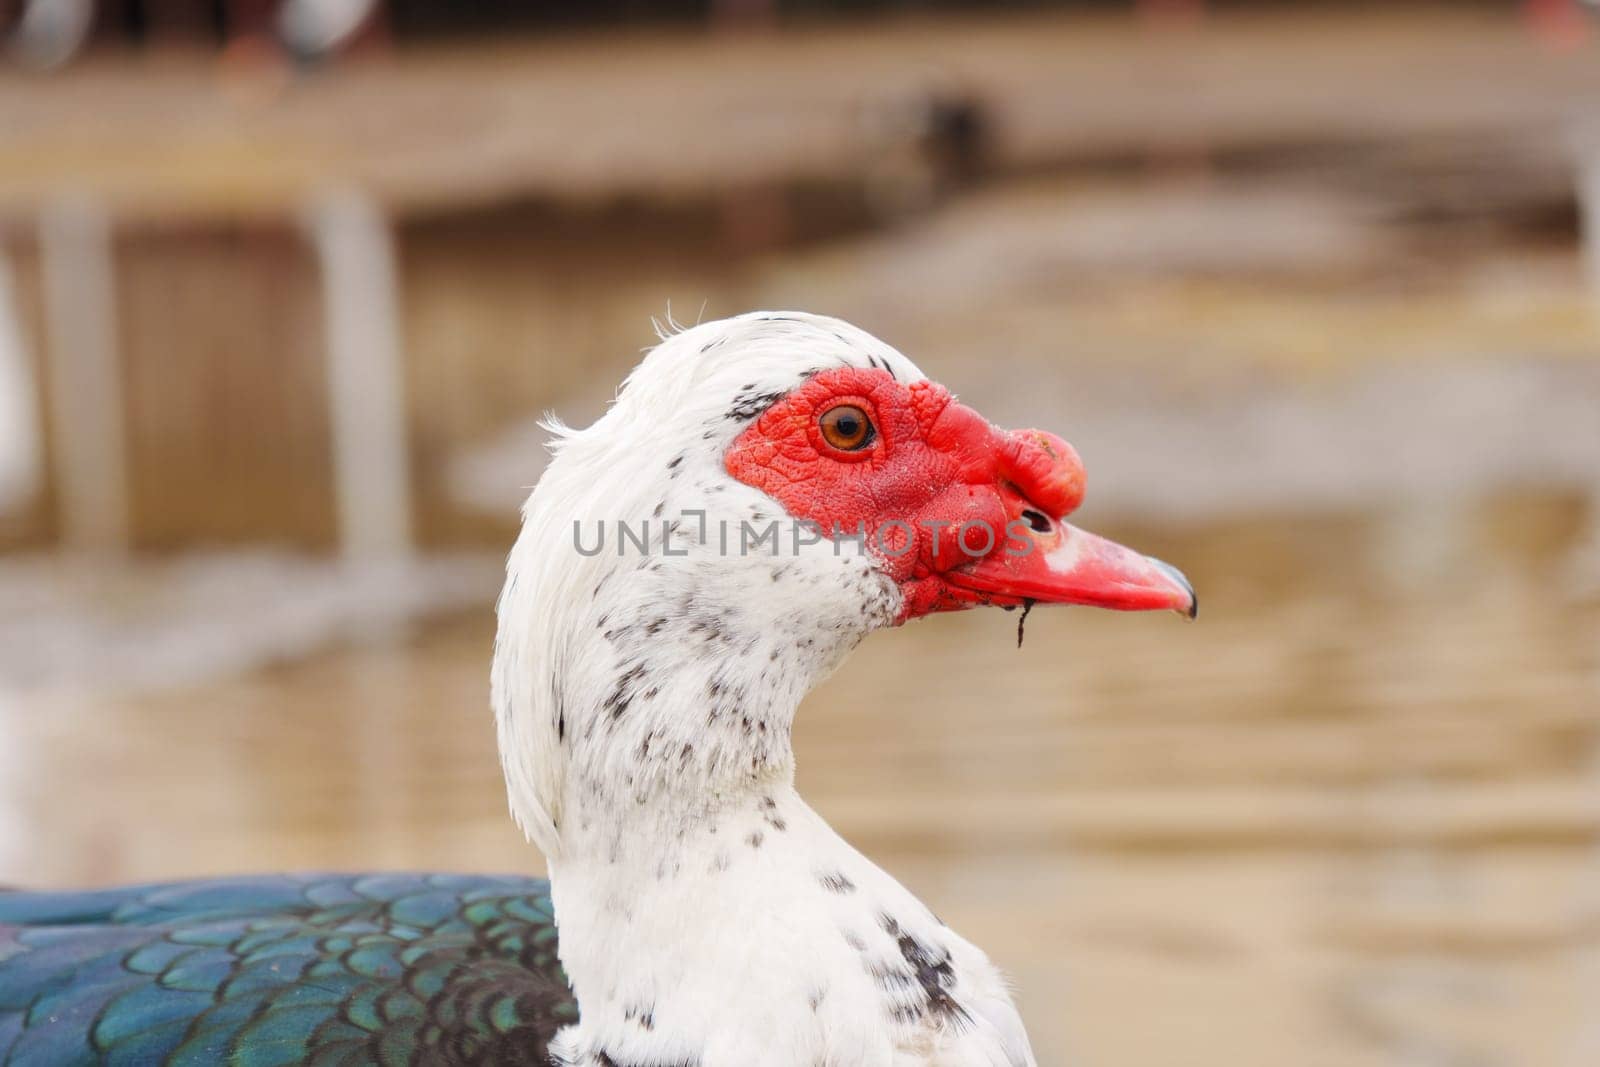 Muscovy duck and a distinctive red face is seen rummaging through the soil at the edge of a puddle.